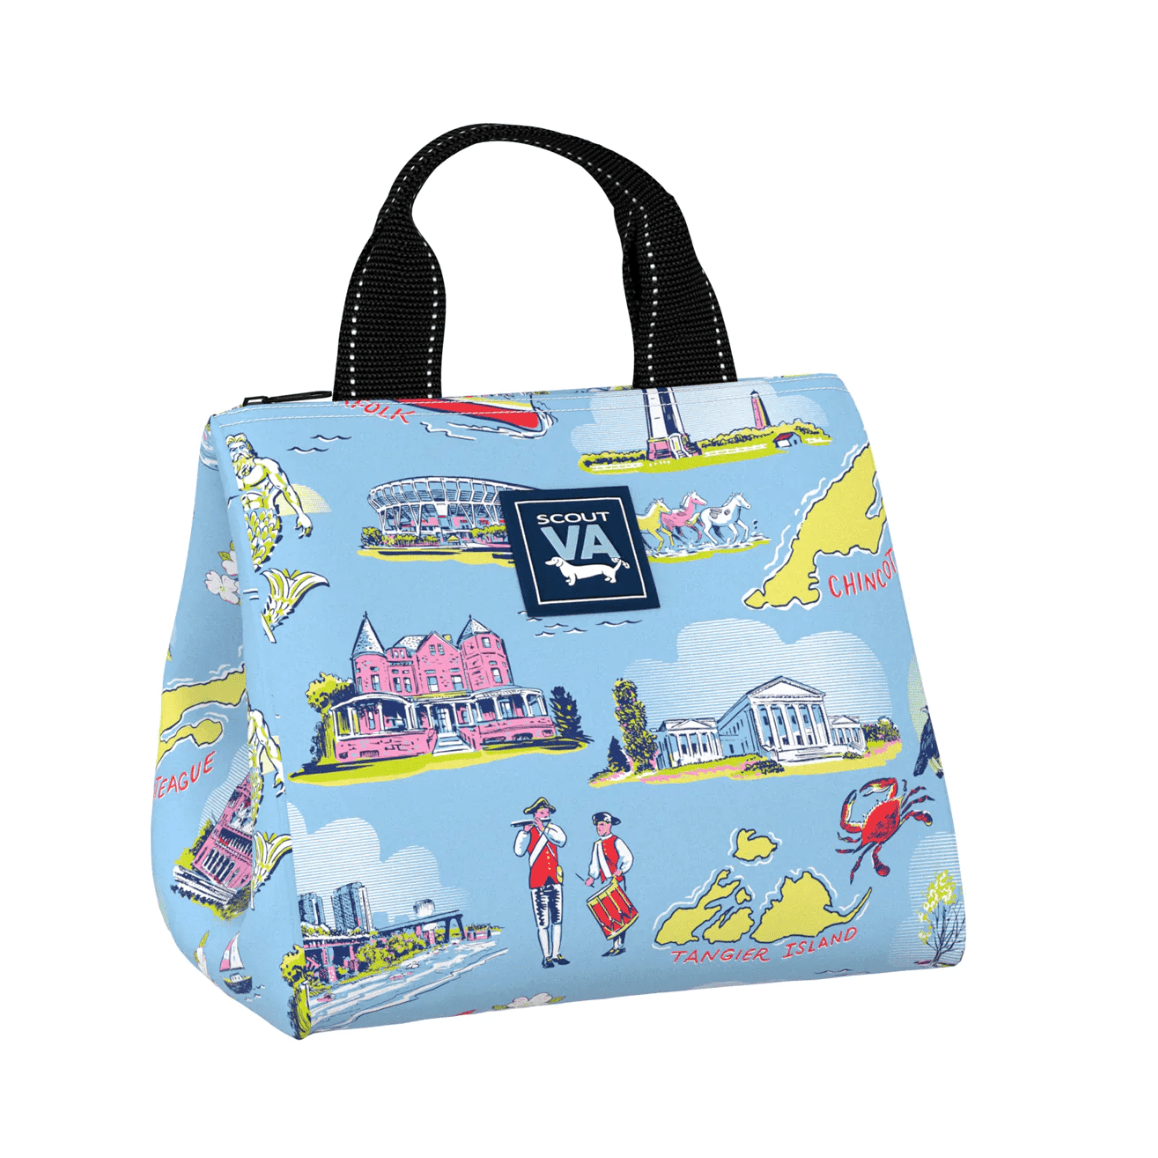 Scout SCOUT Eloise Lunch Box - Virginia